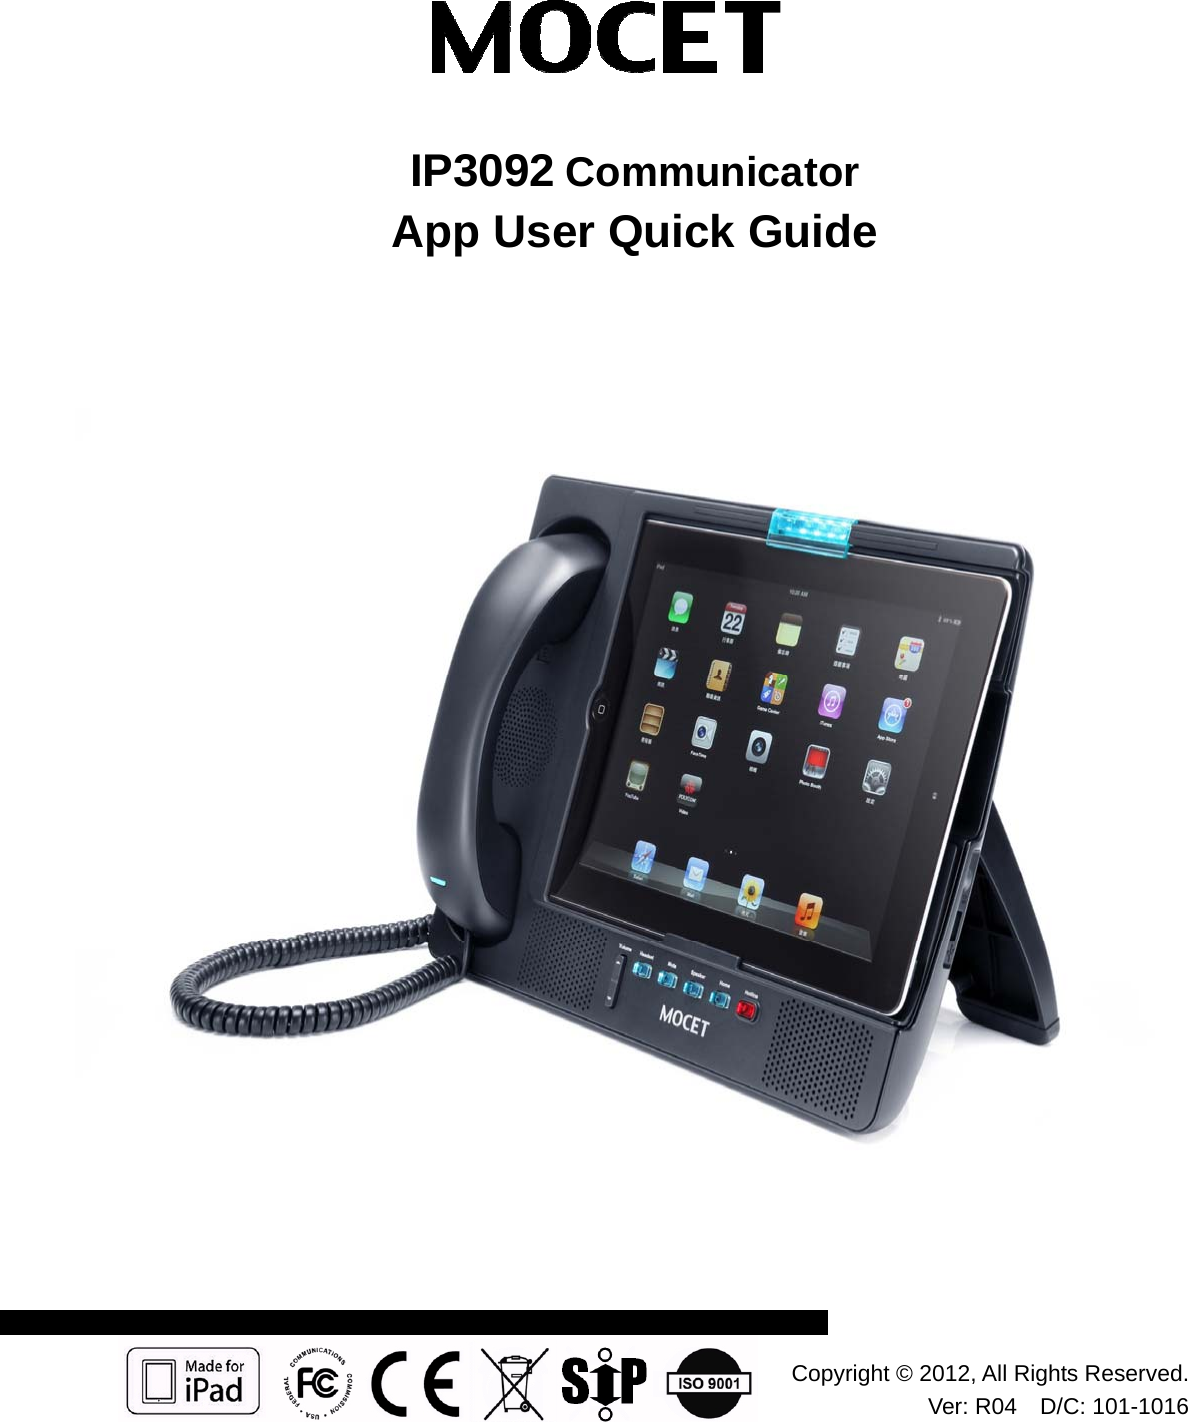              IP3092 Communicator  App User Quick Guide   Copyright © 2012, All Rights Reserved.Ver: R04  D/C: 101-1016